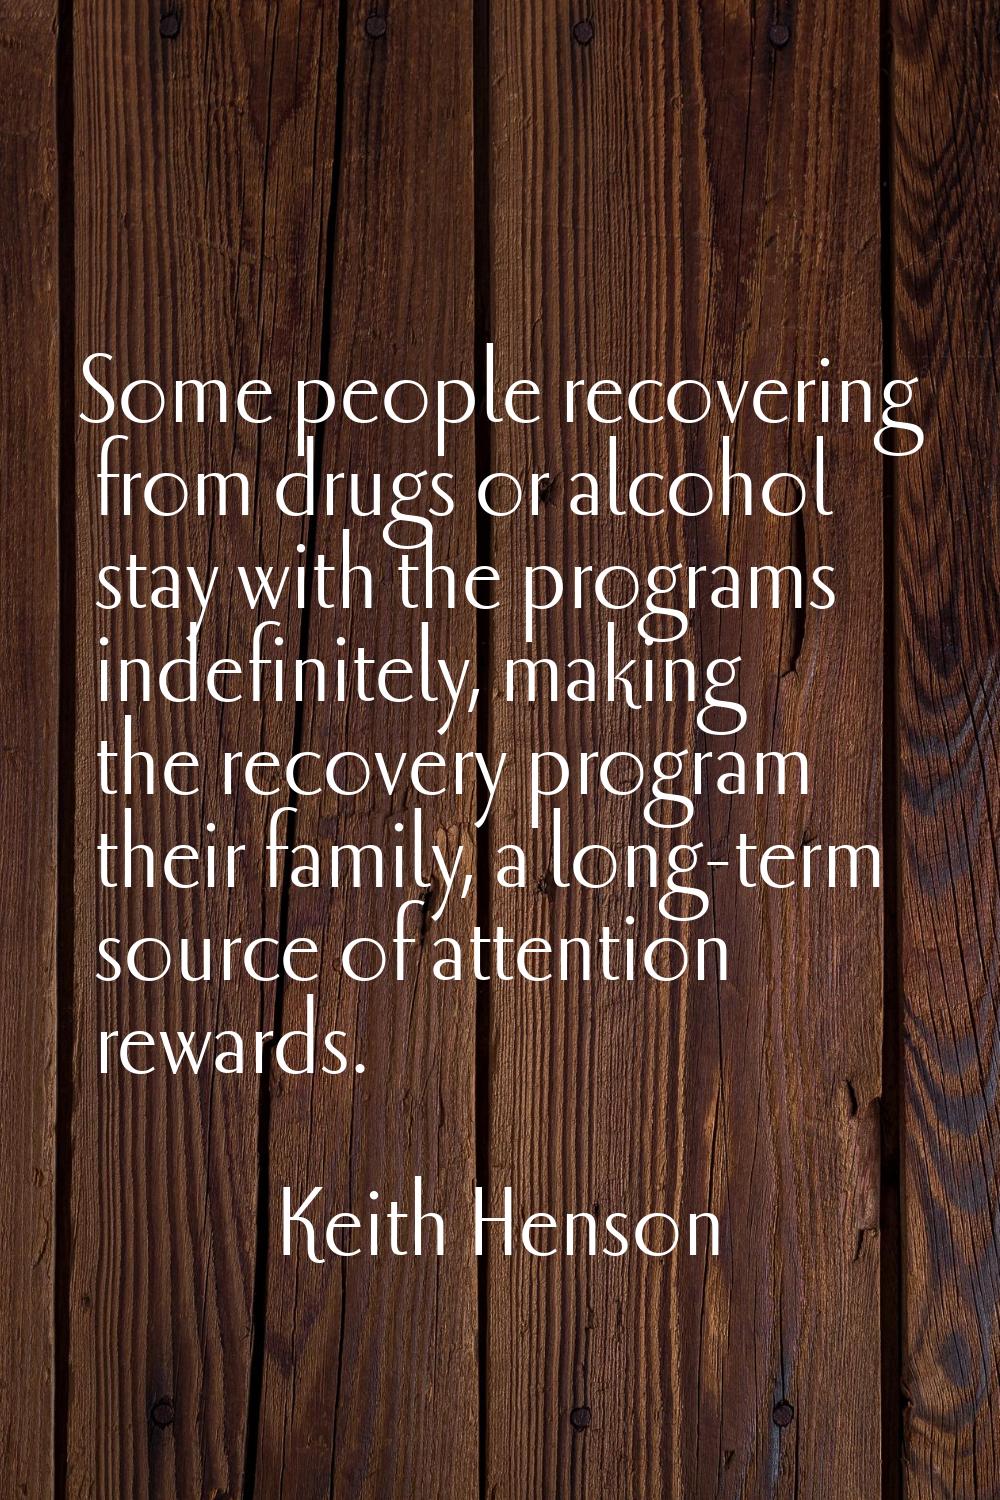 Some people recovering from drugs or alcohol stay with the programs indefinitely, making the recove